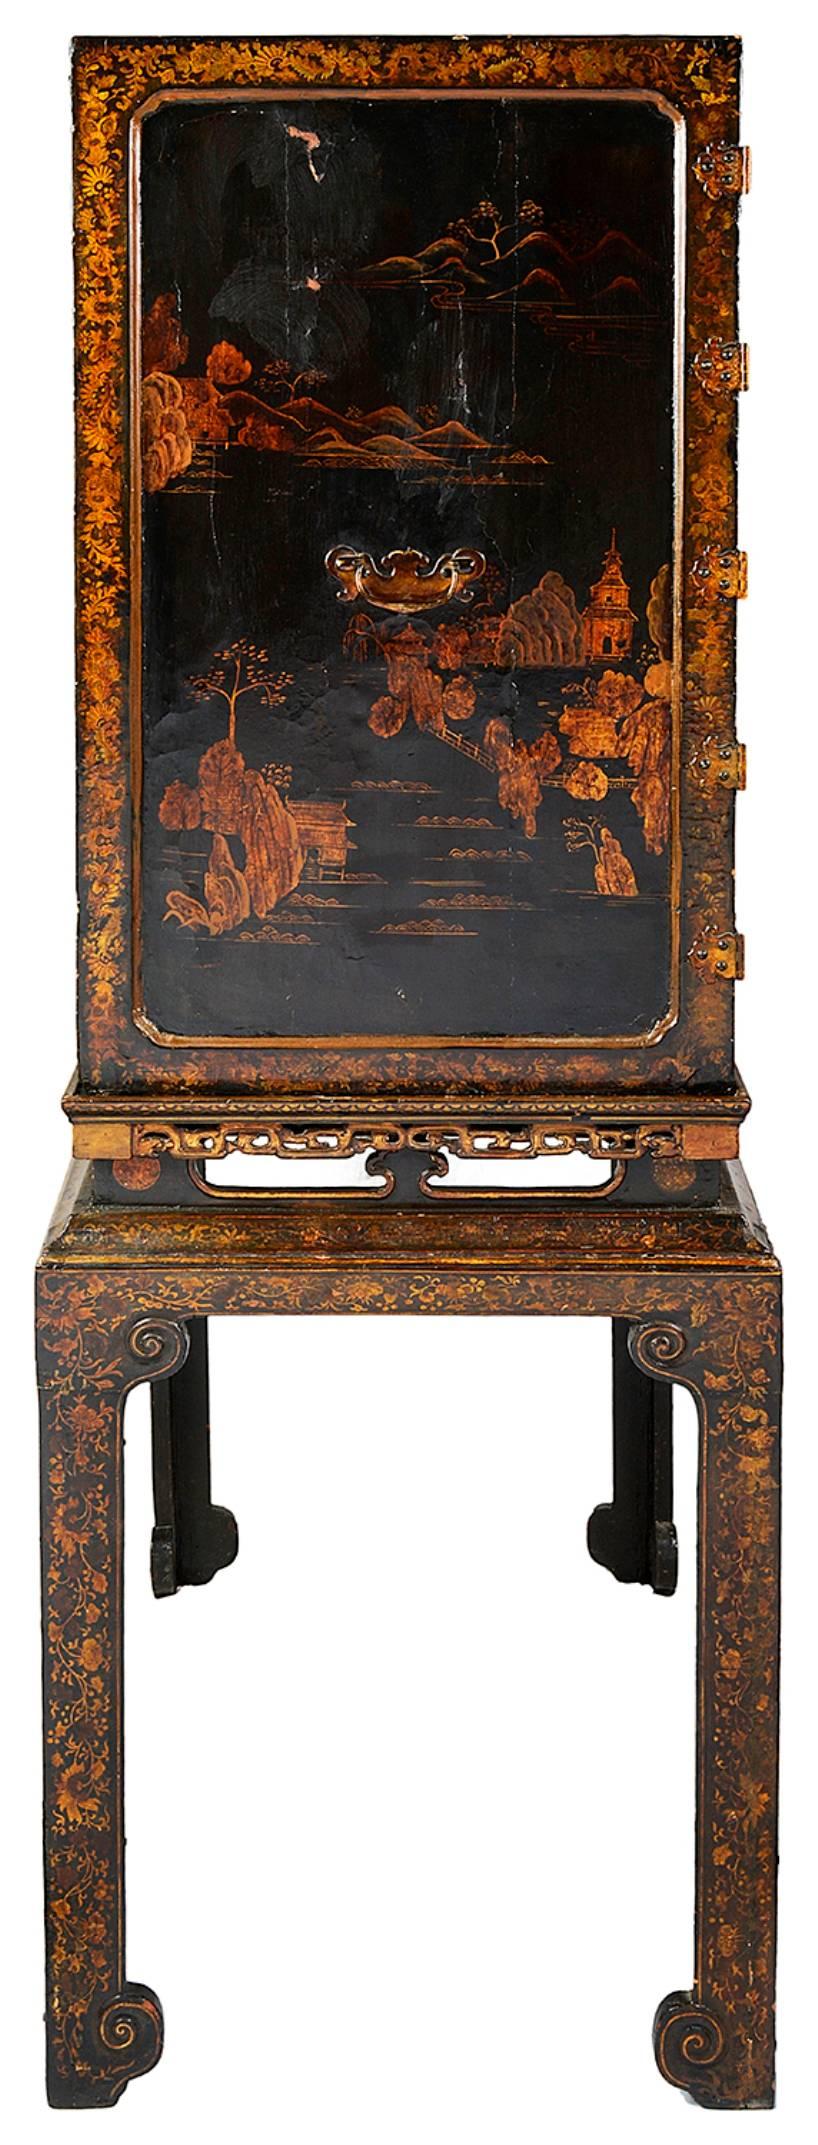 Hand-Painted 18th Century Lacquer Cabinet on Stand